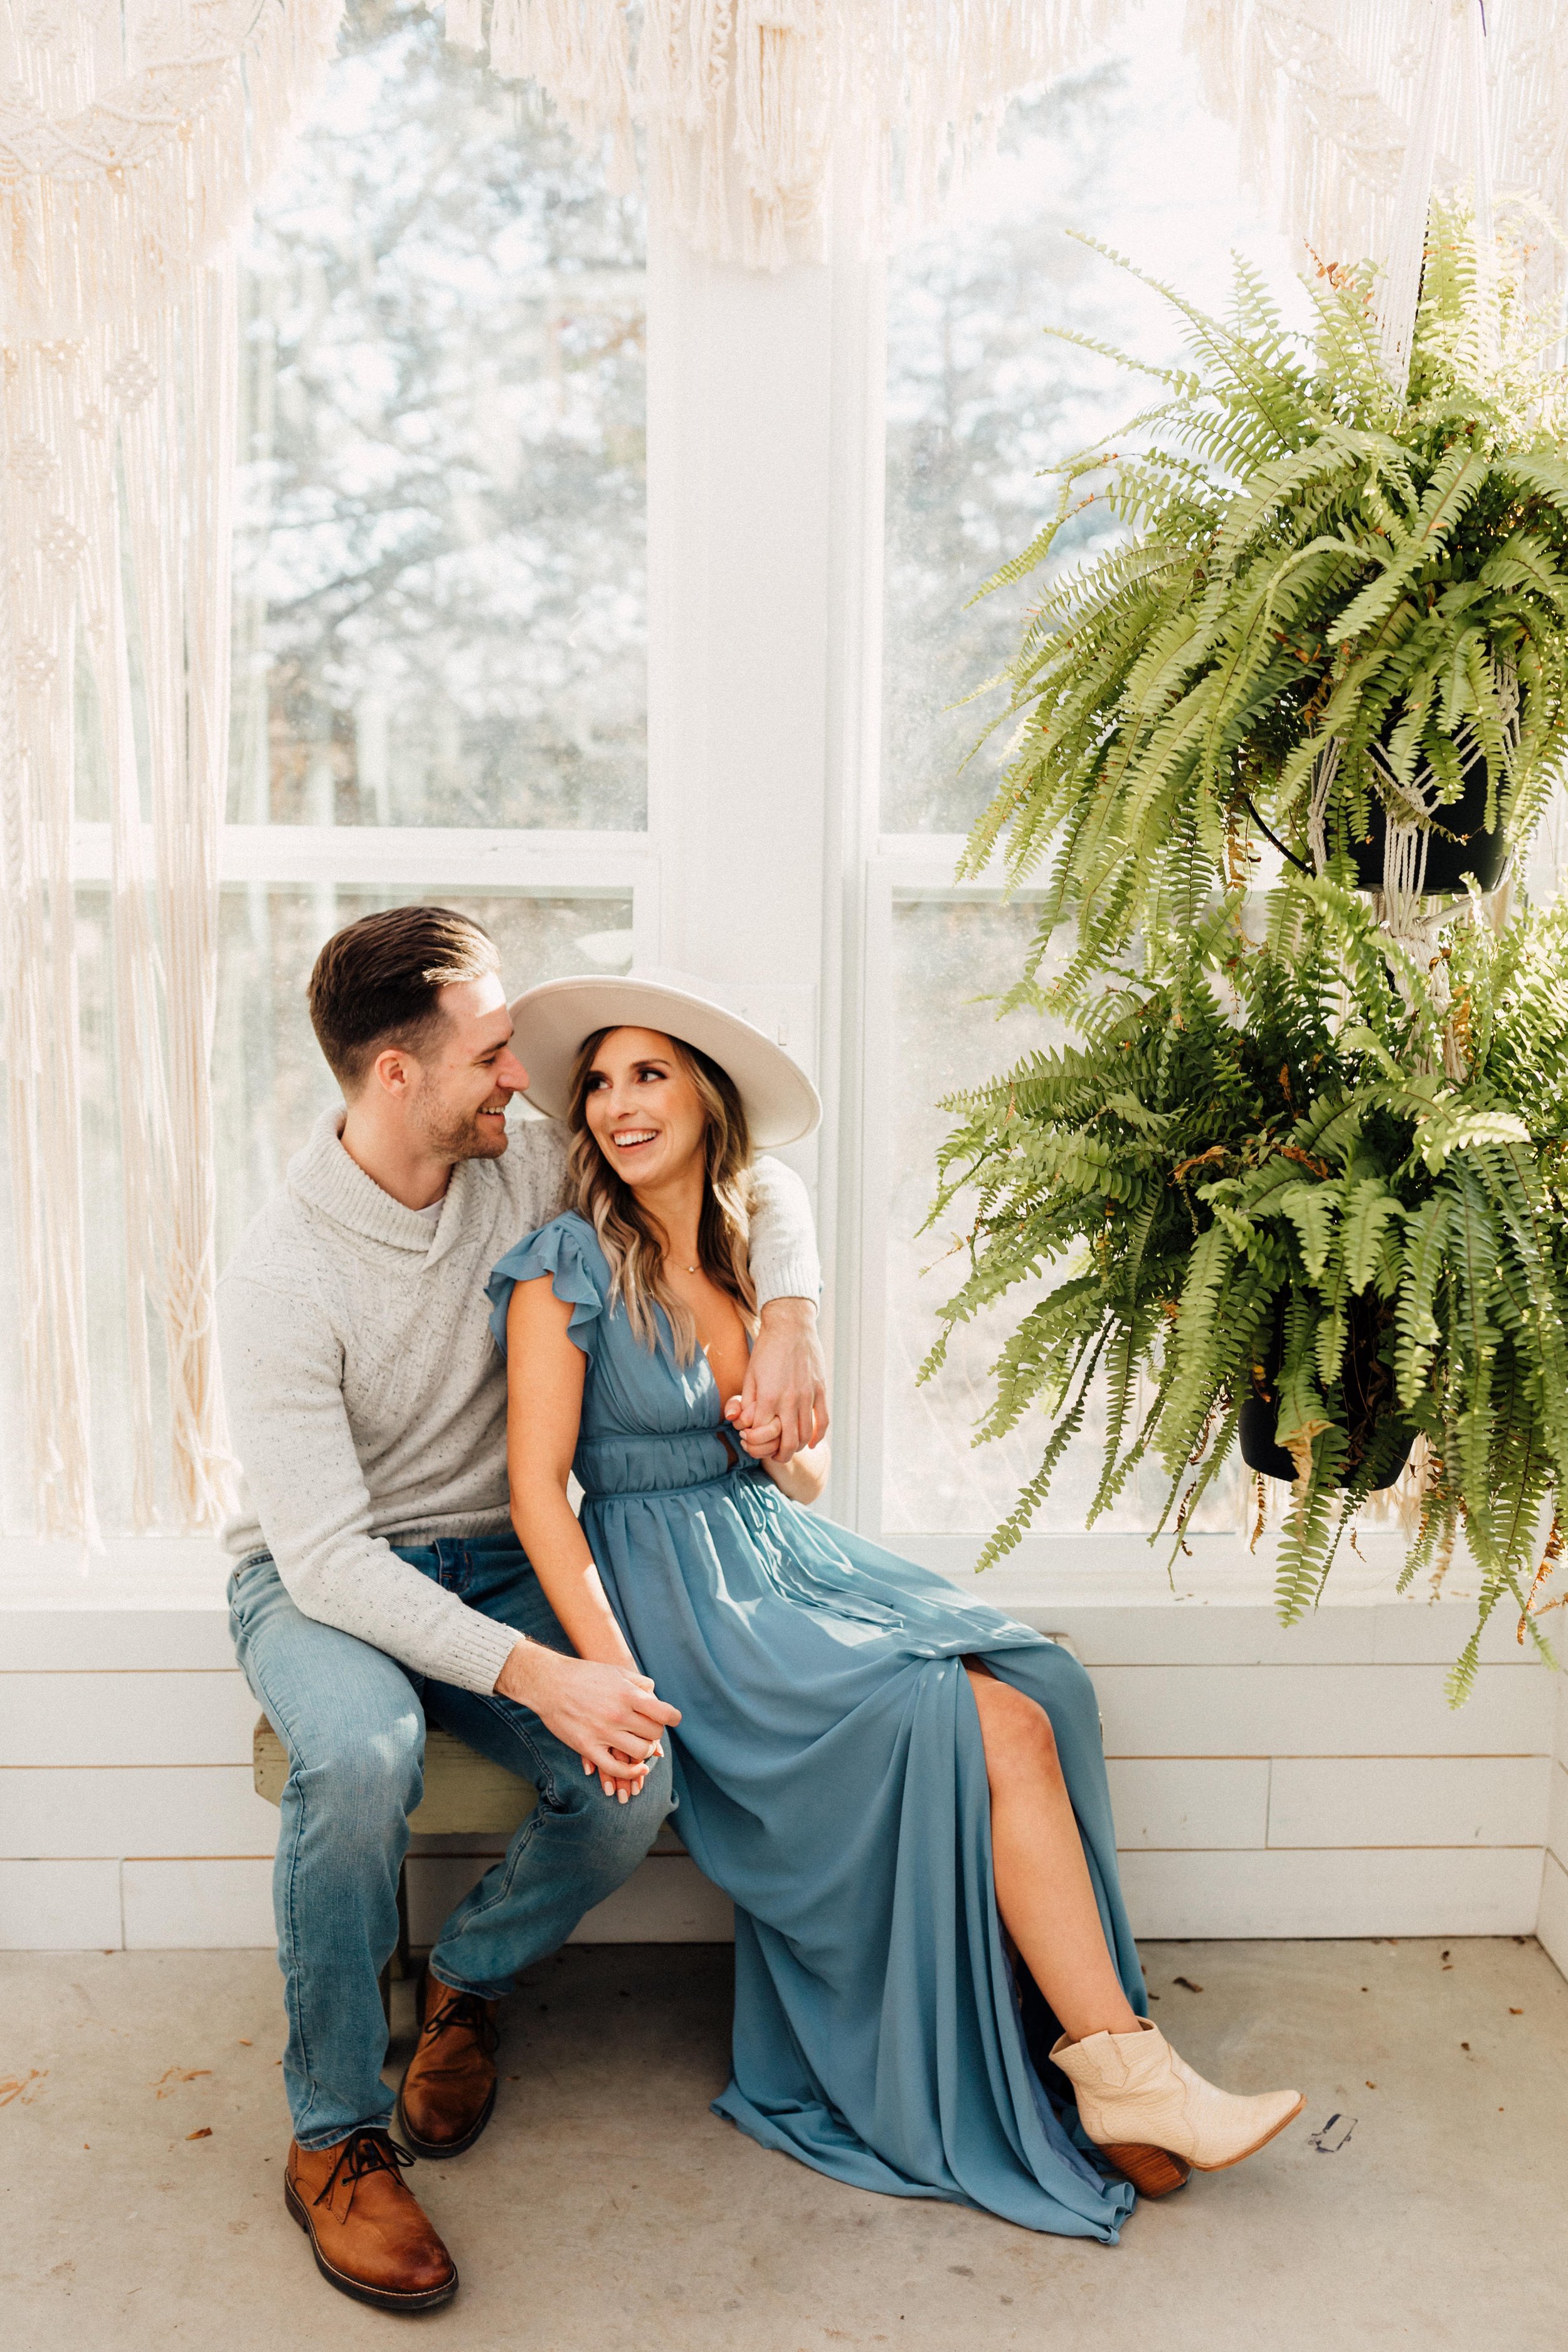 Laura_Ben_Engagment_Session_Winterset_Des_moines_Iowa_Couples_Photographer_Iris_Aisle_Cabin_Conservatory_Candid_Snow_Day_Winter_KMP_Photography-9215.jpg